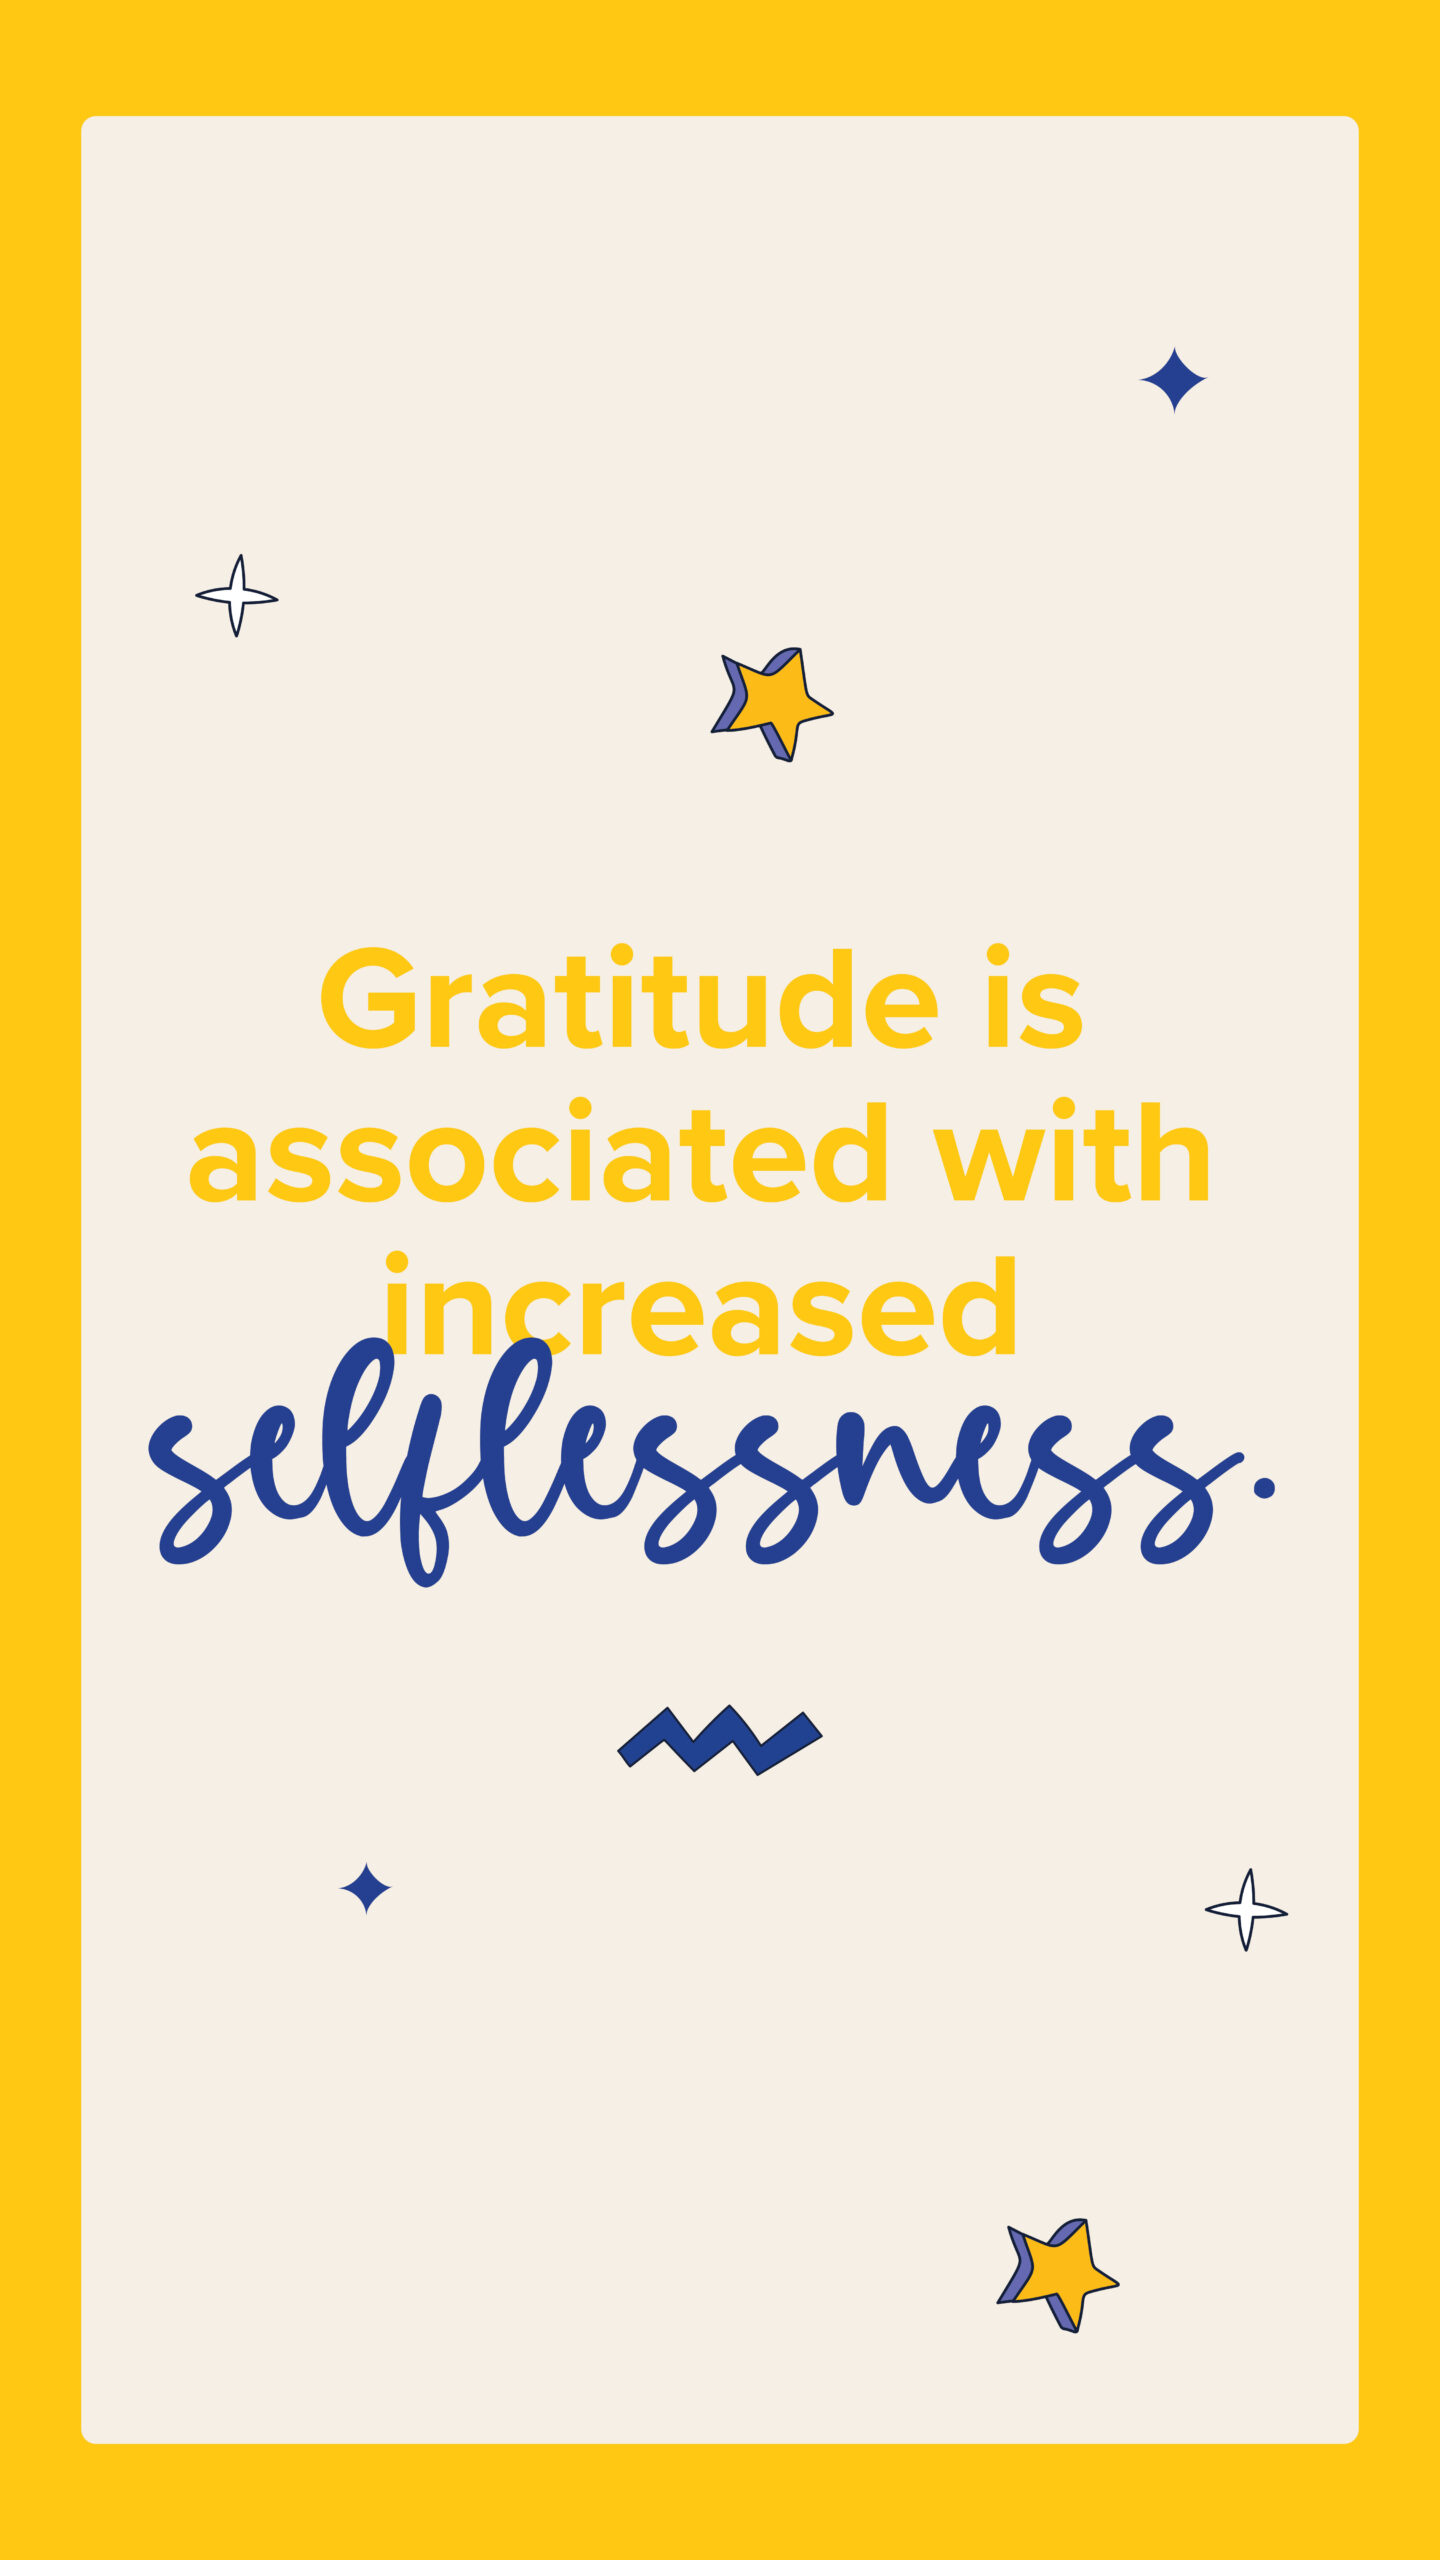 Gratitude is associated with increased selflessness. With illustrated stars graphics